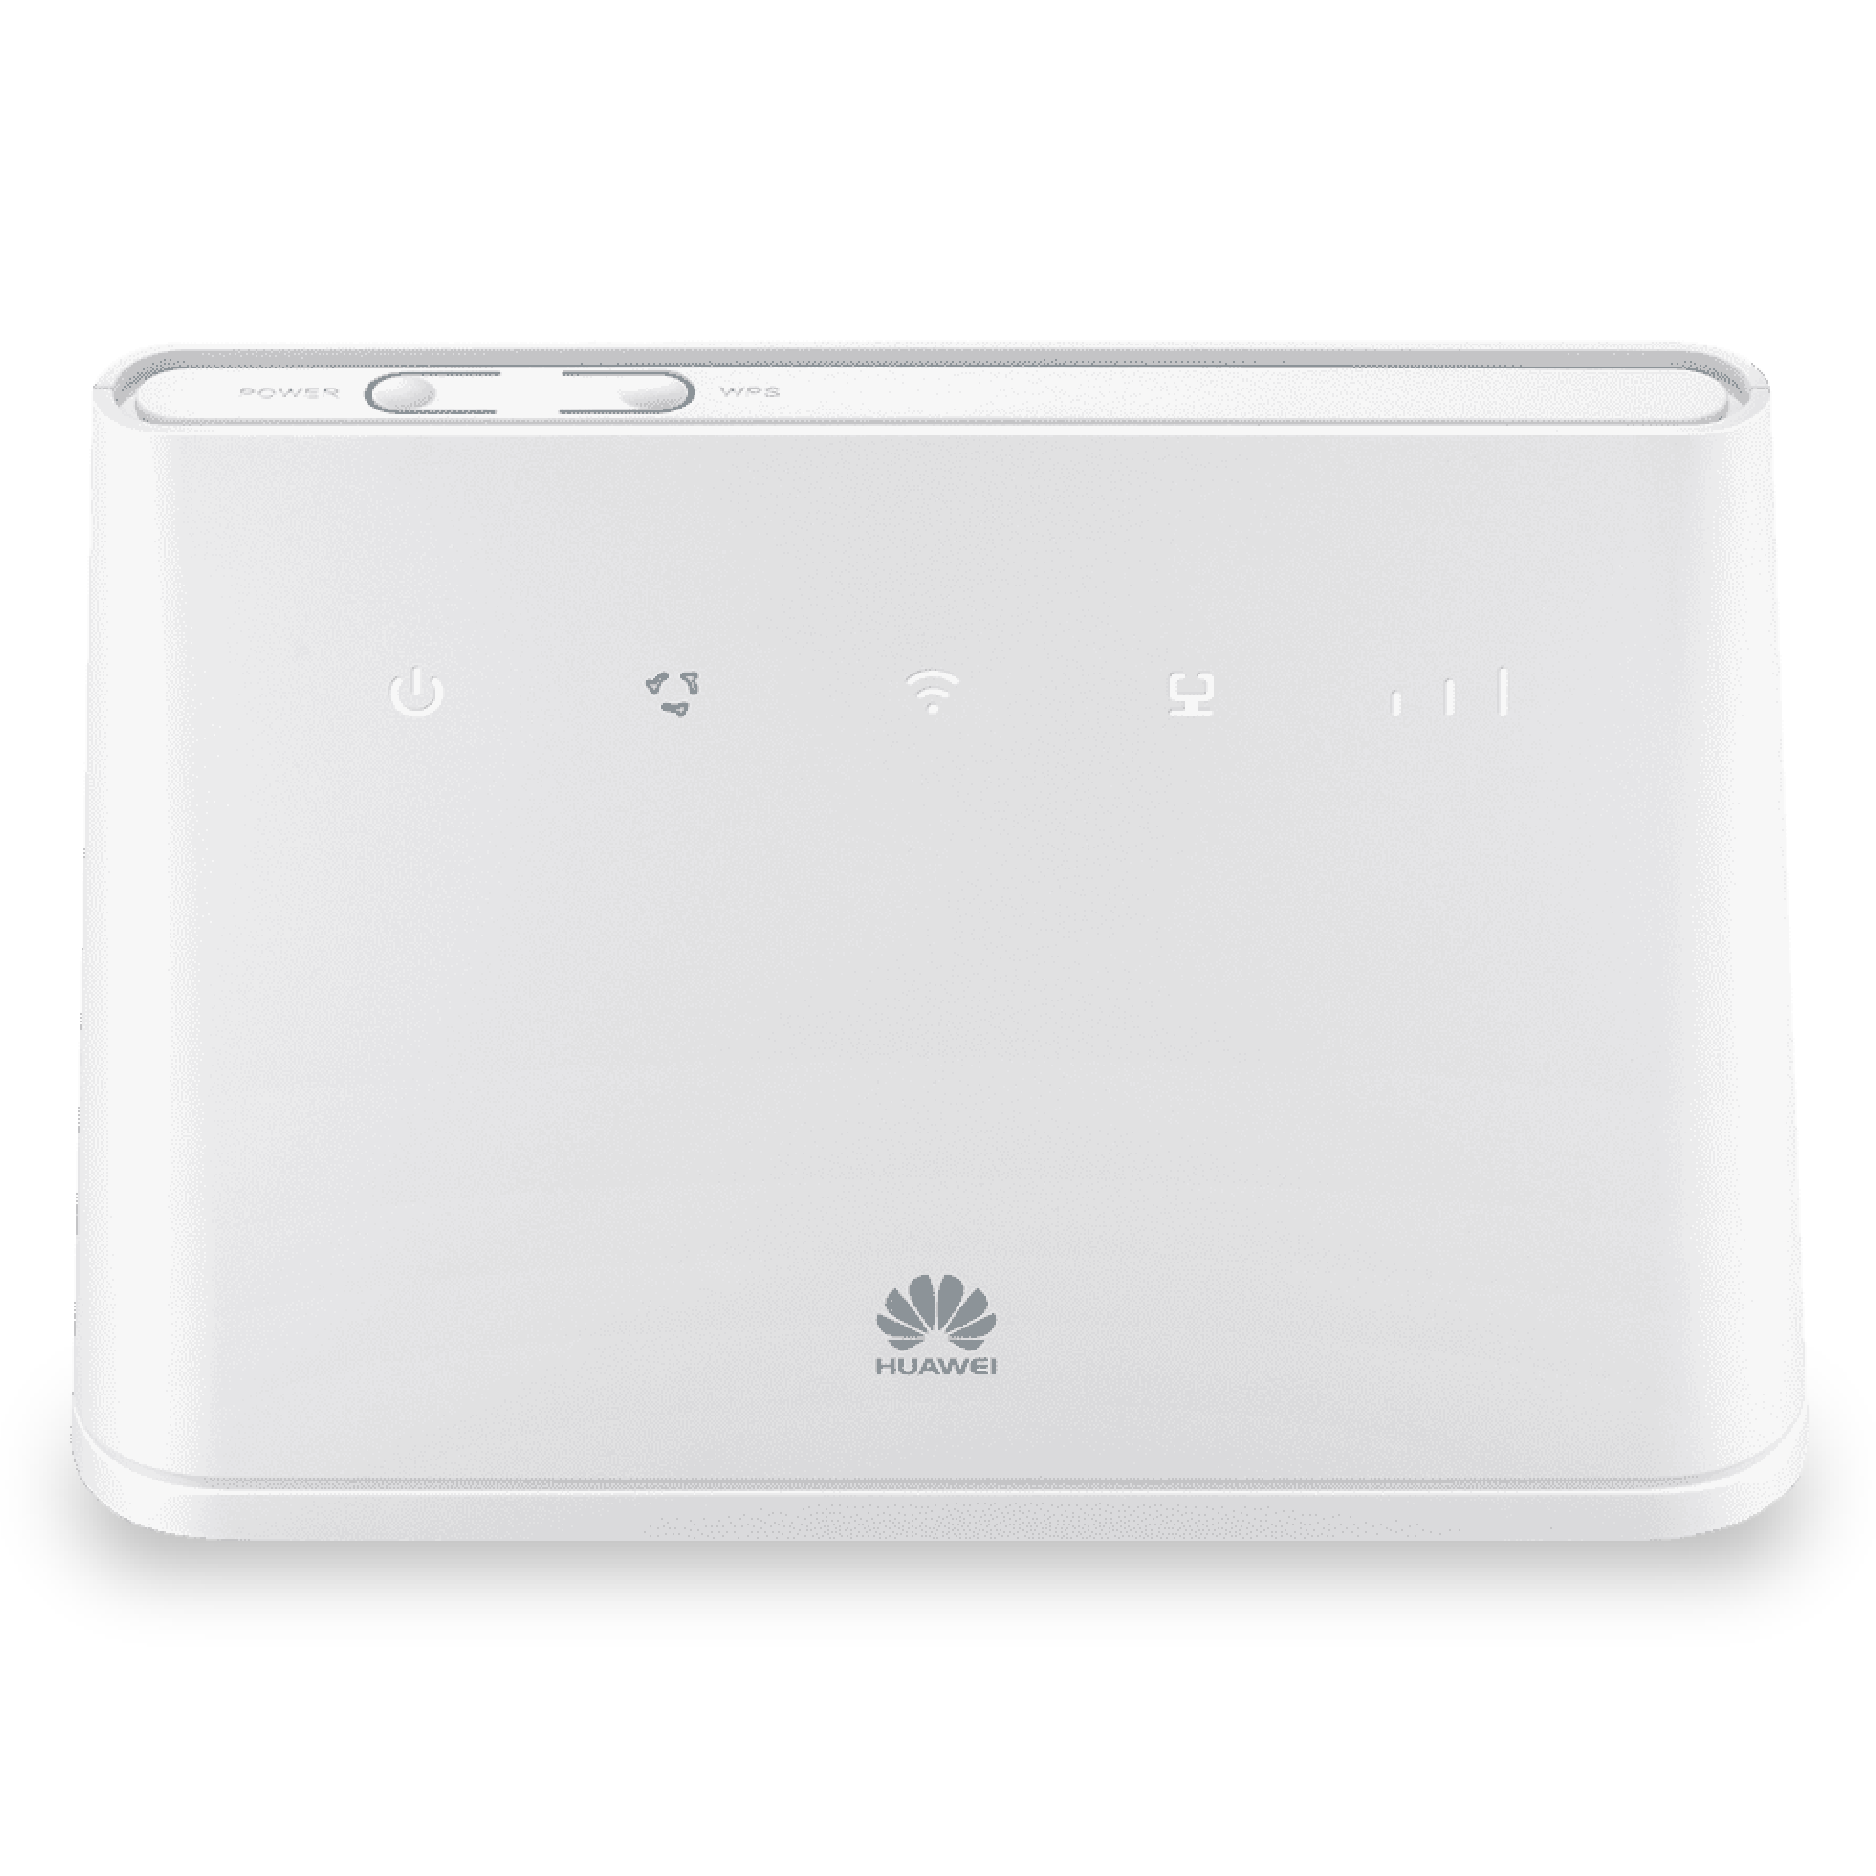 The Huaweii 4G router used in our connectivity plans